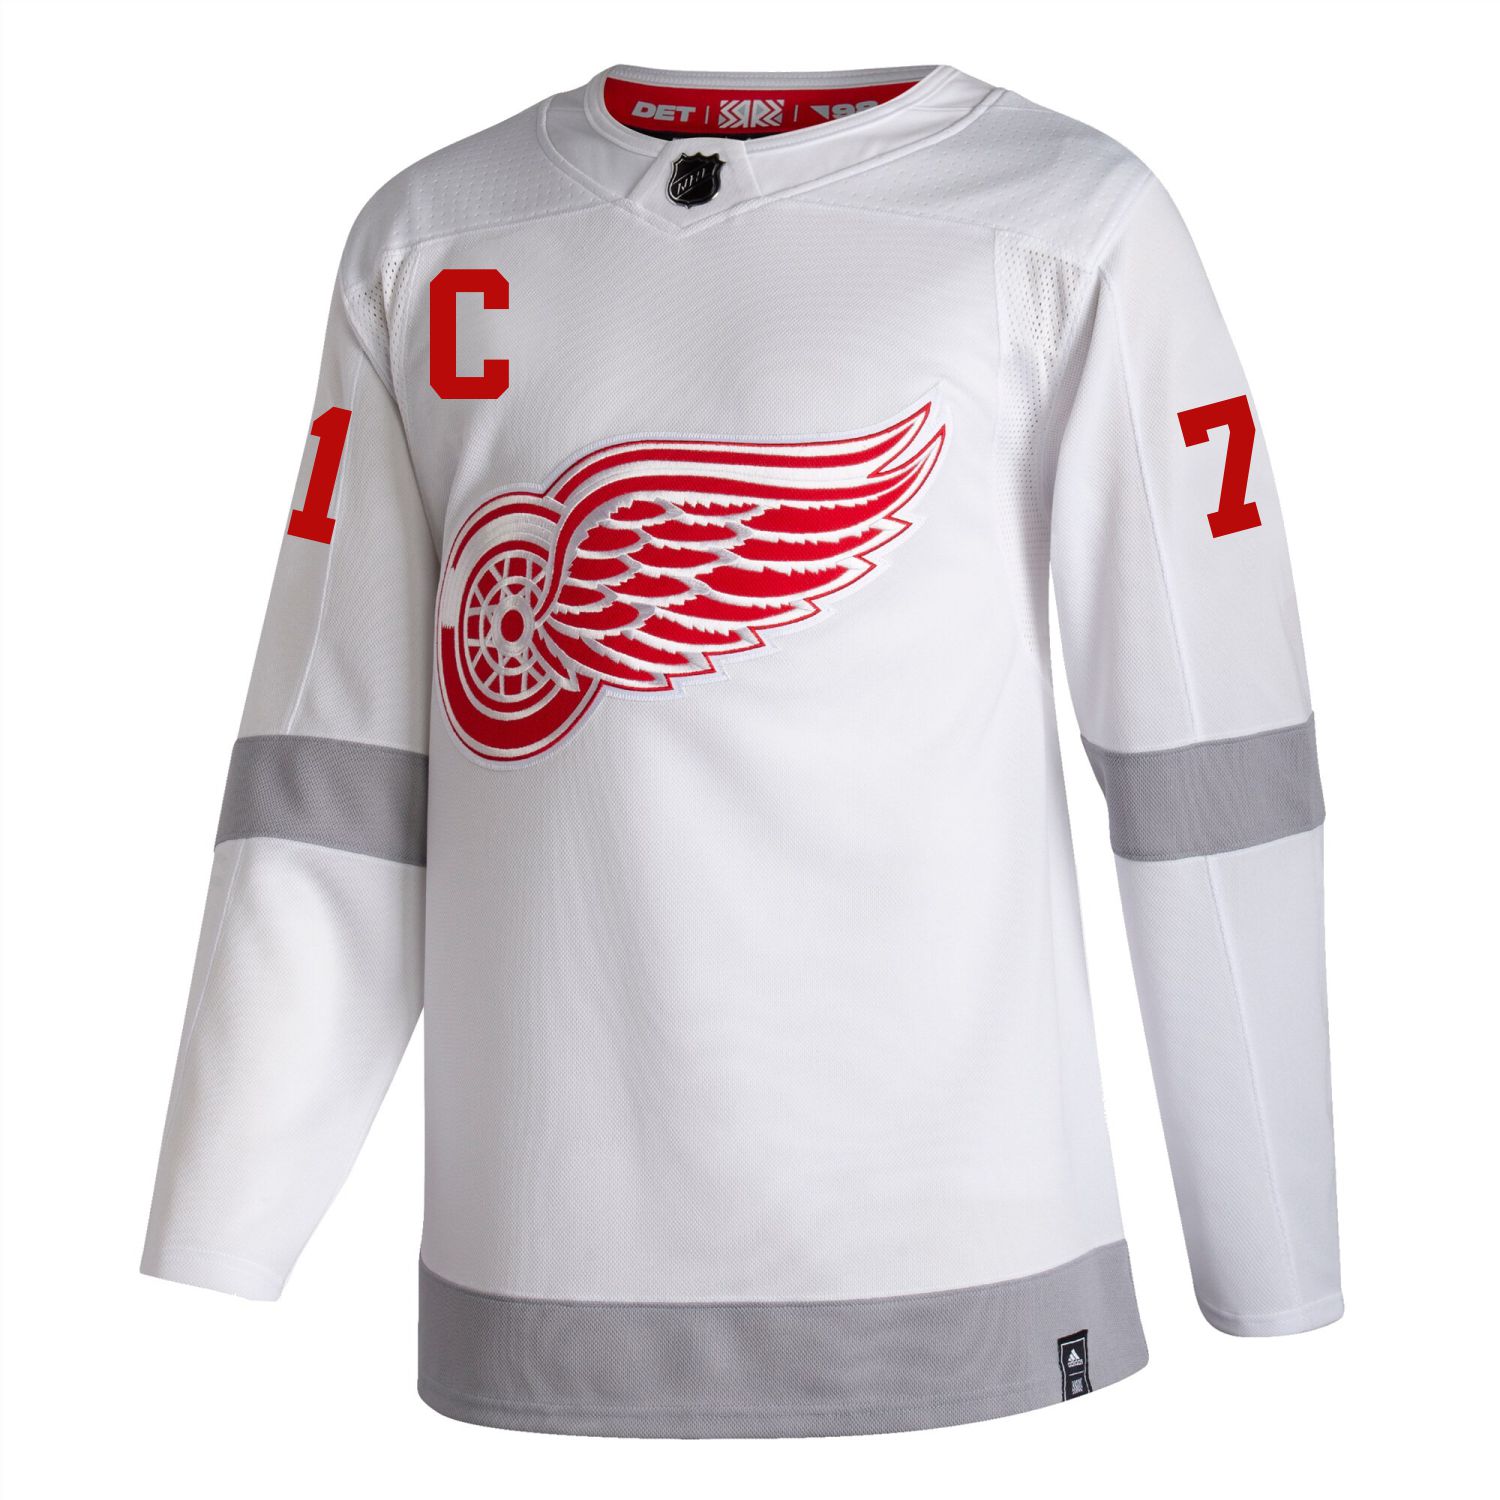 adidas Detroit Red Wing Dylan Larkin #71 ADIZERO Home Authentic Jersey